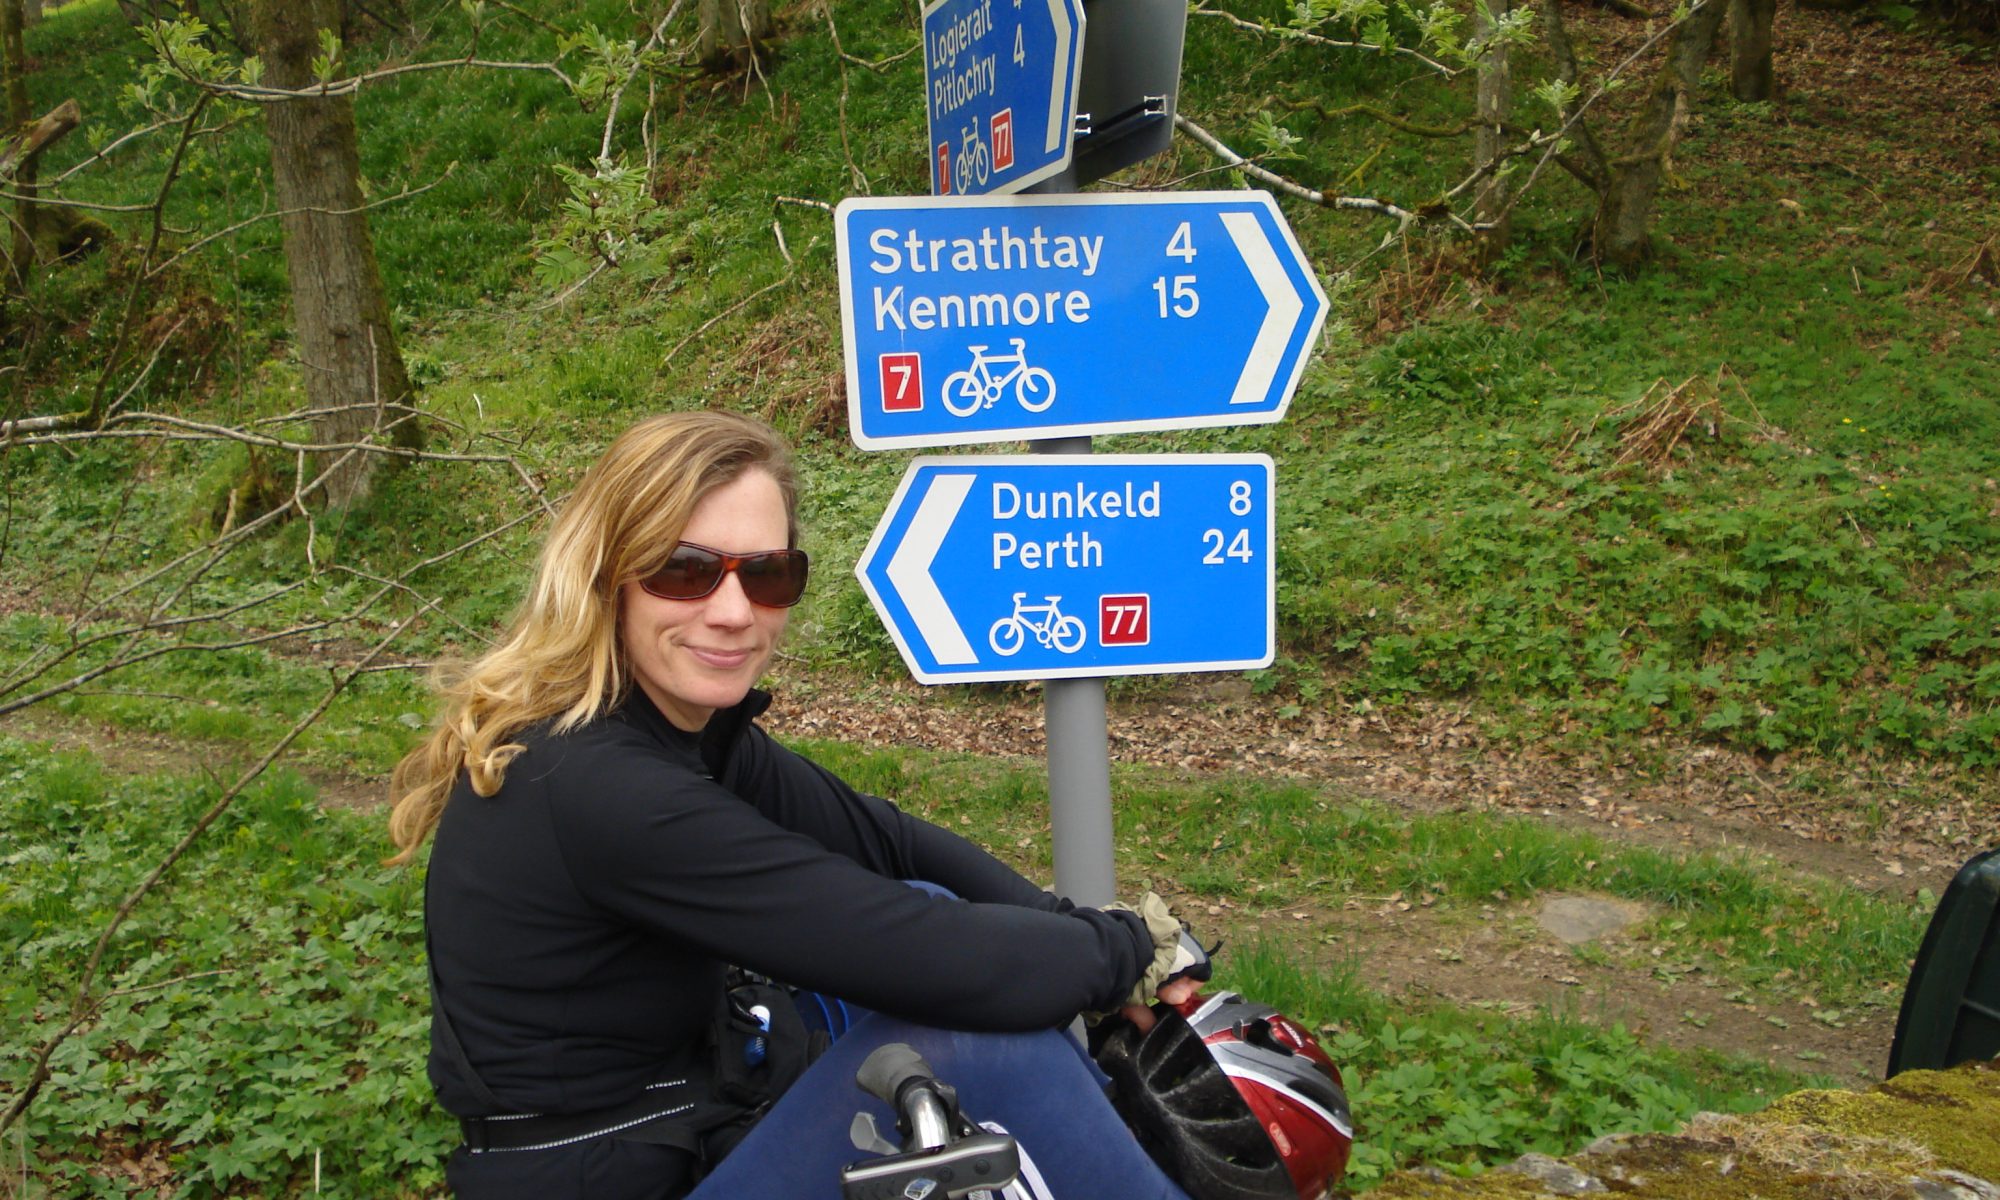 Cycling holiday in Scotland